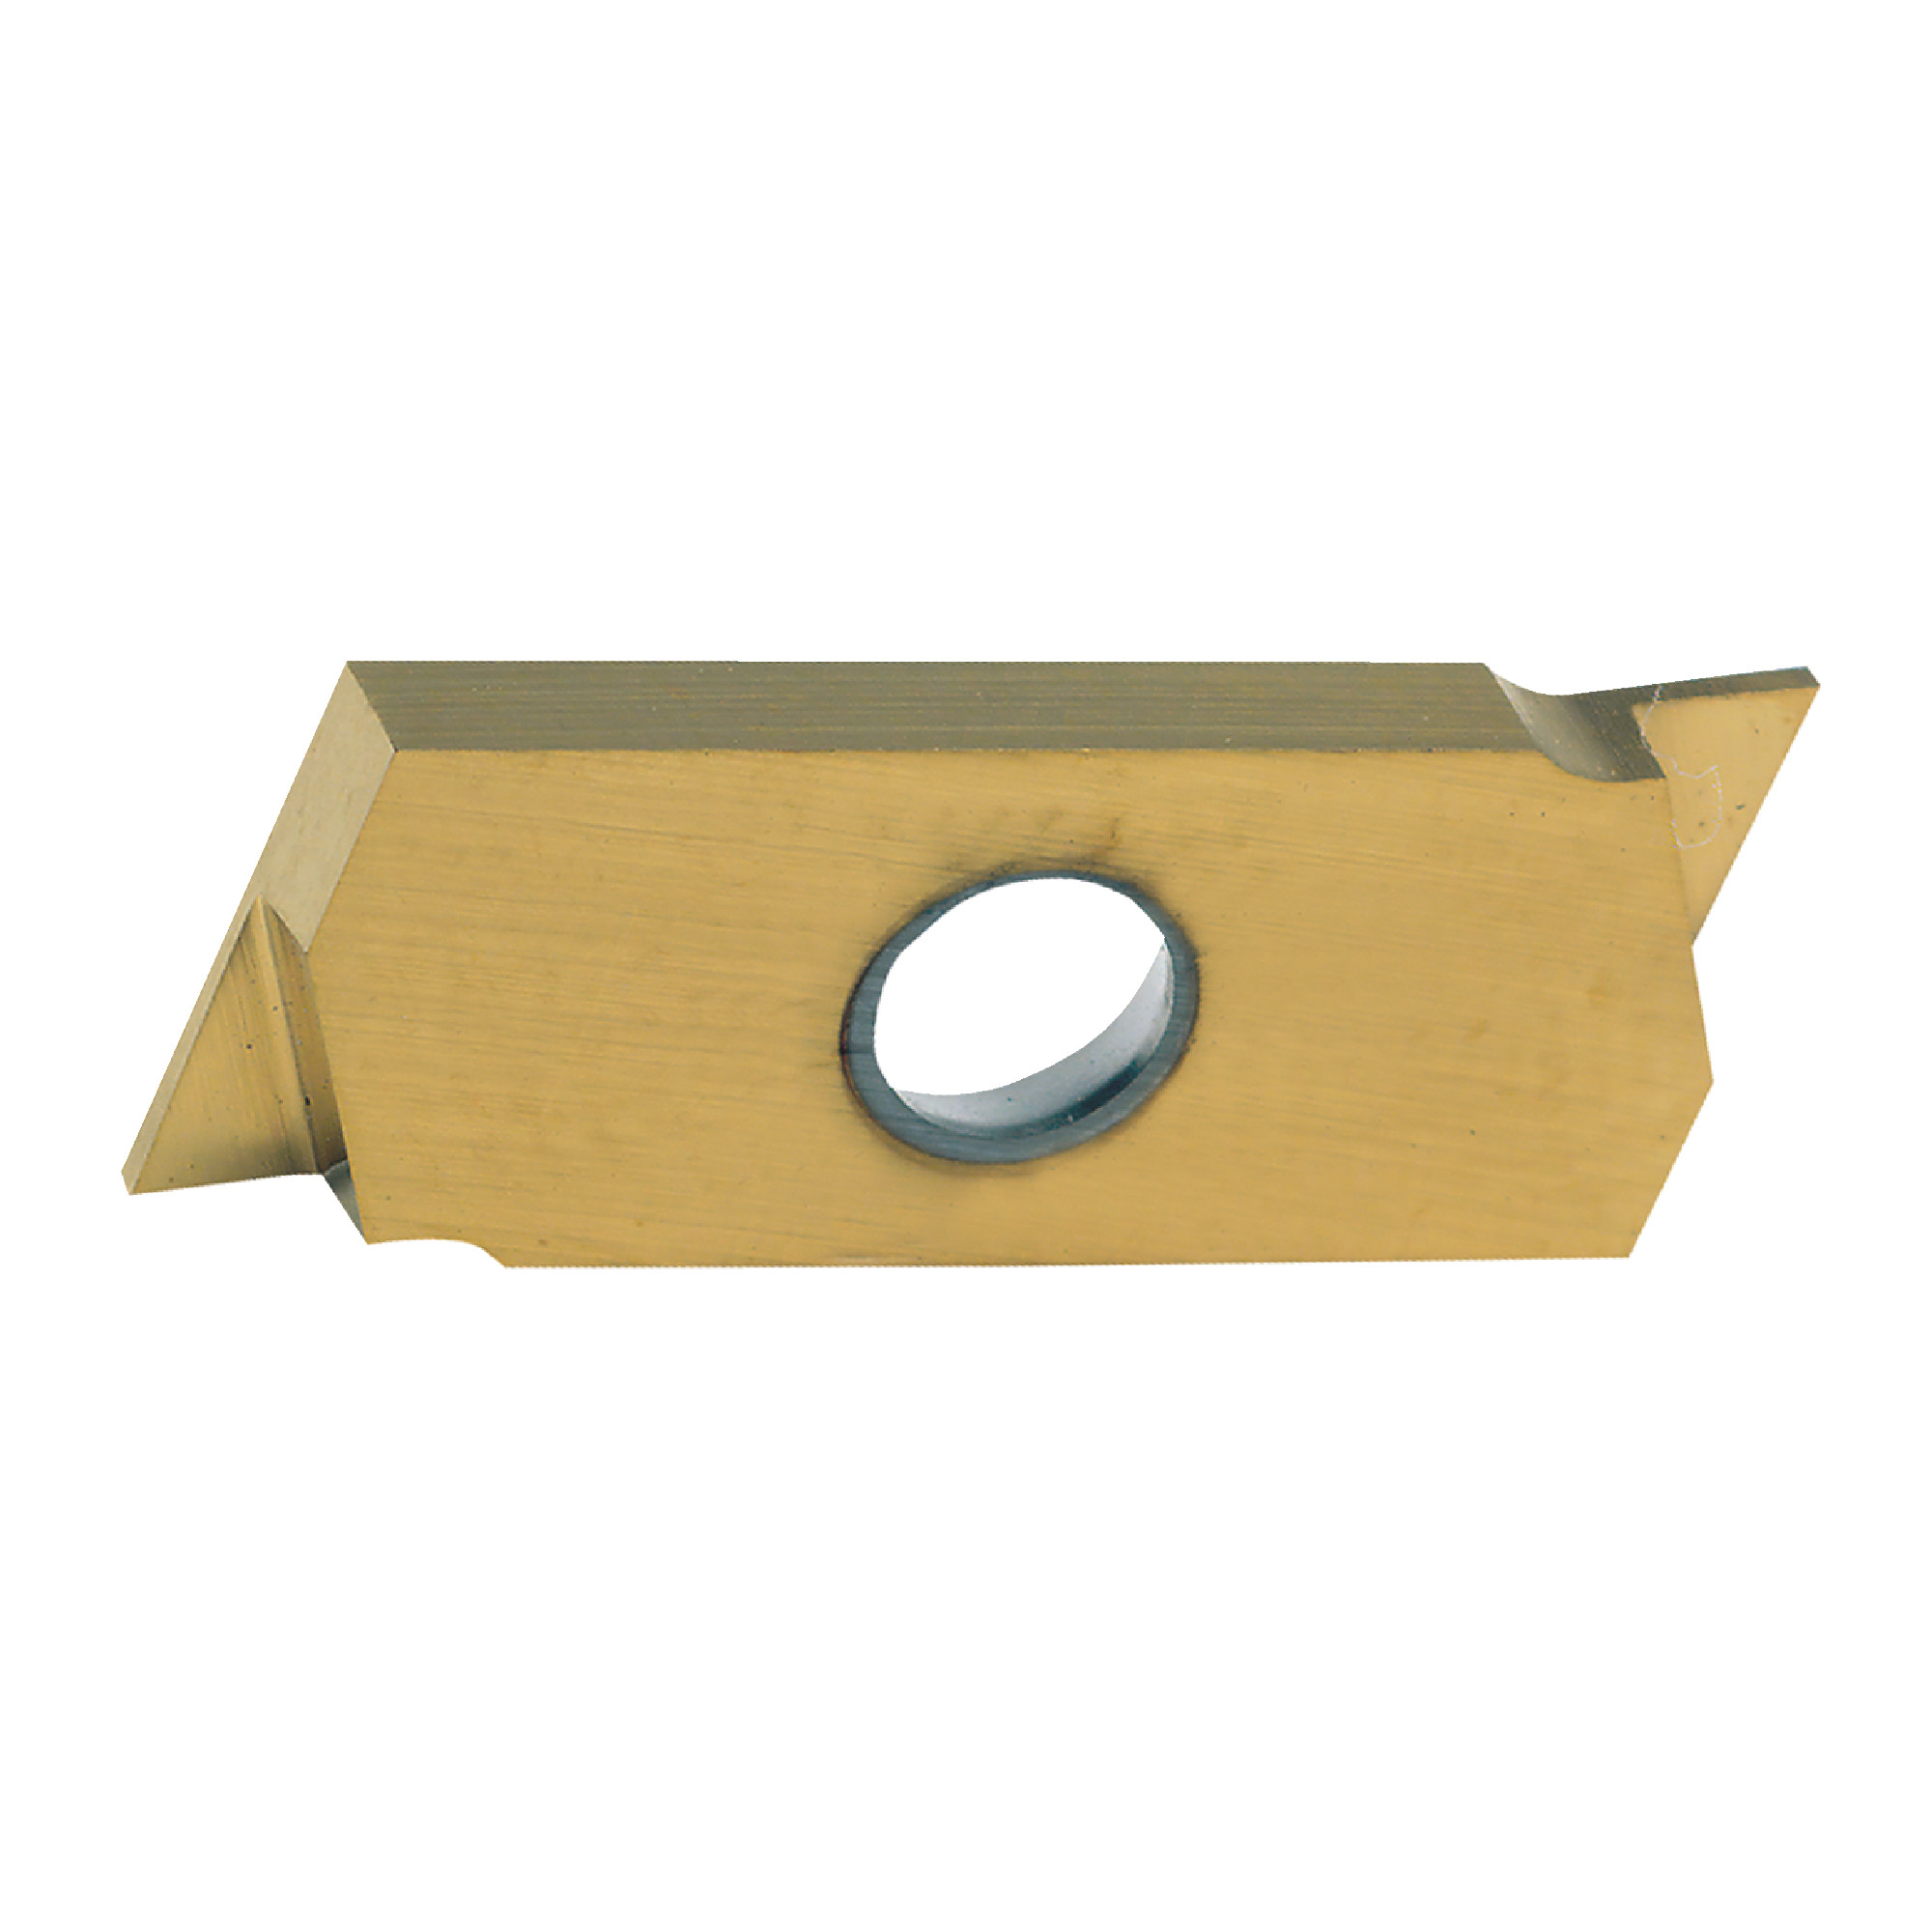 NIKCOLE - GIE-7-SG-0.5R C5-PV / Indexable Carbide Insert for Grooving / 0.020" Cutting Width / Right Hand